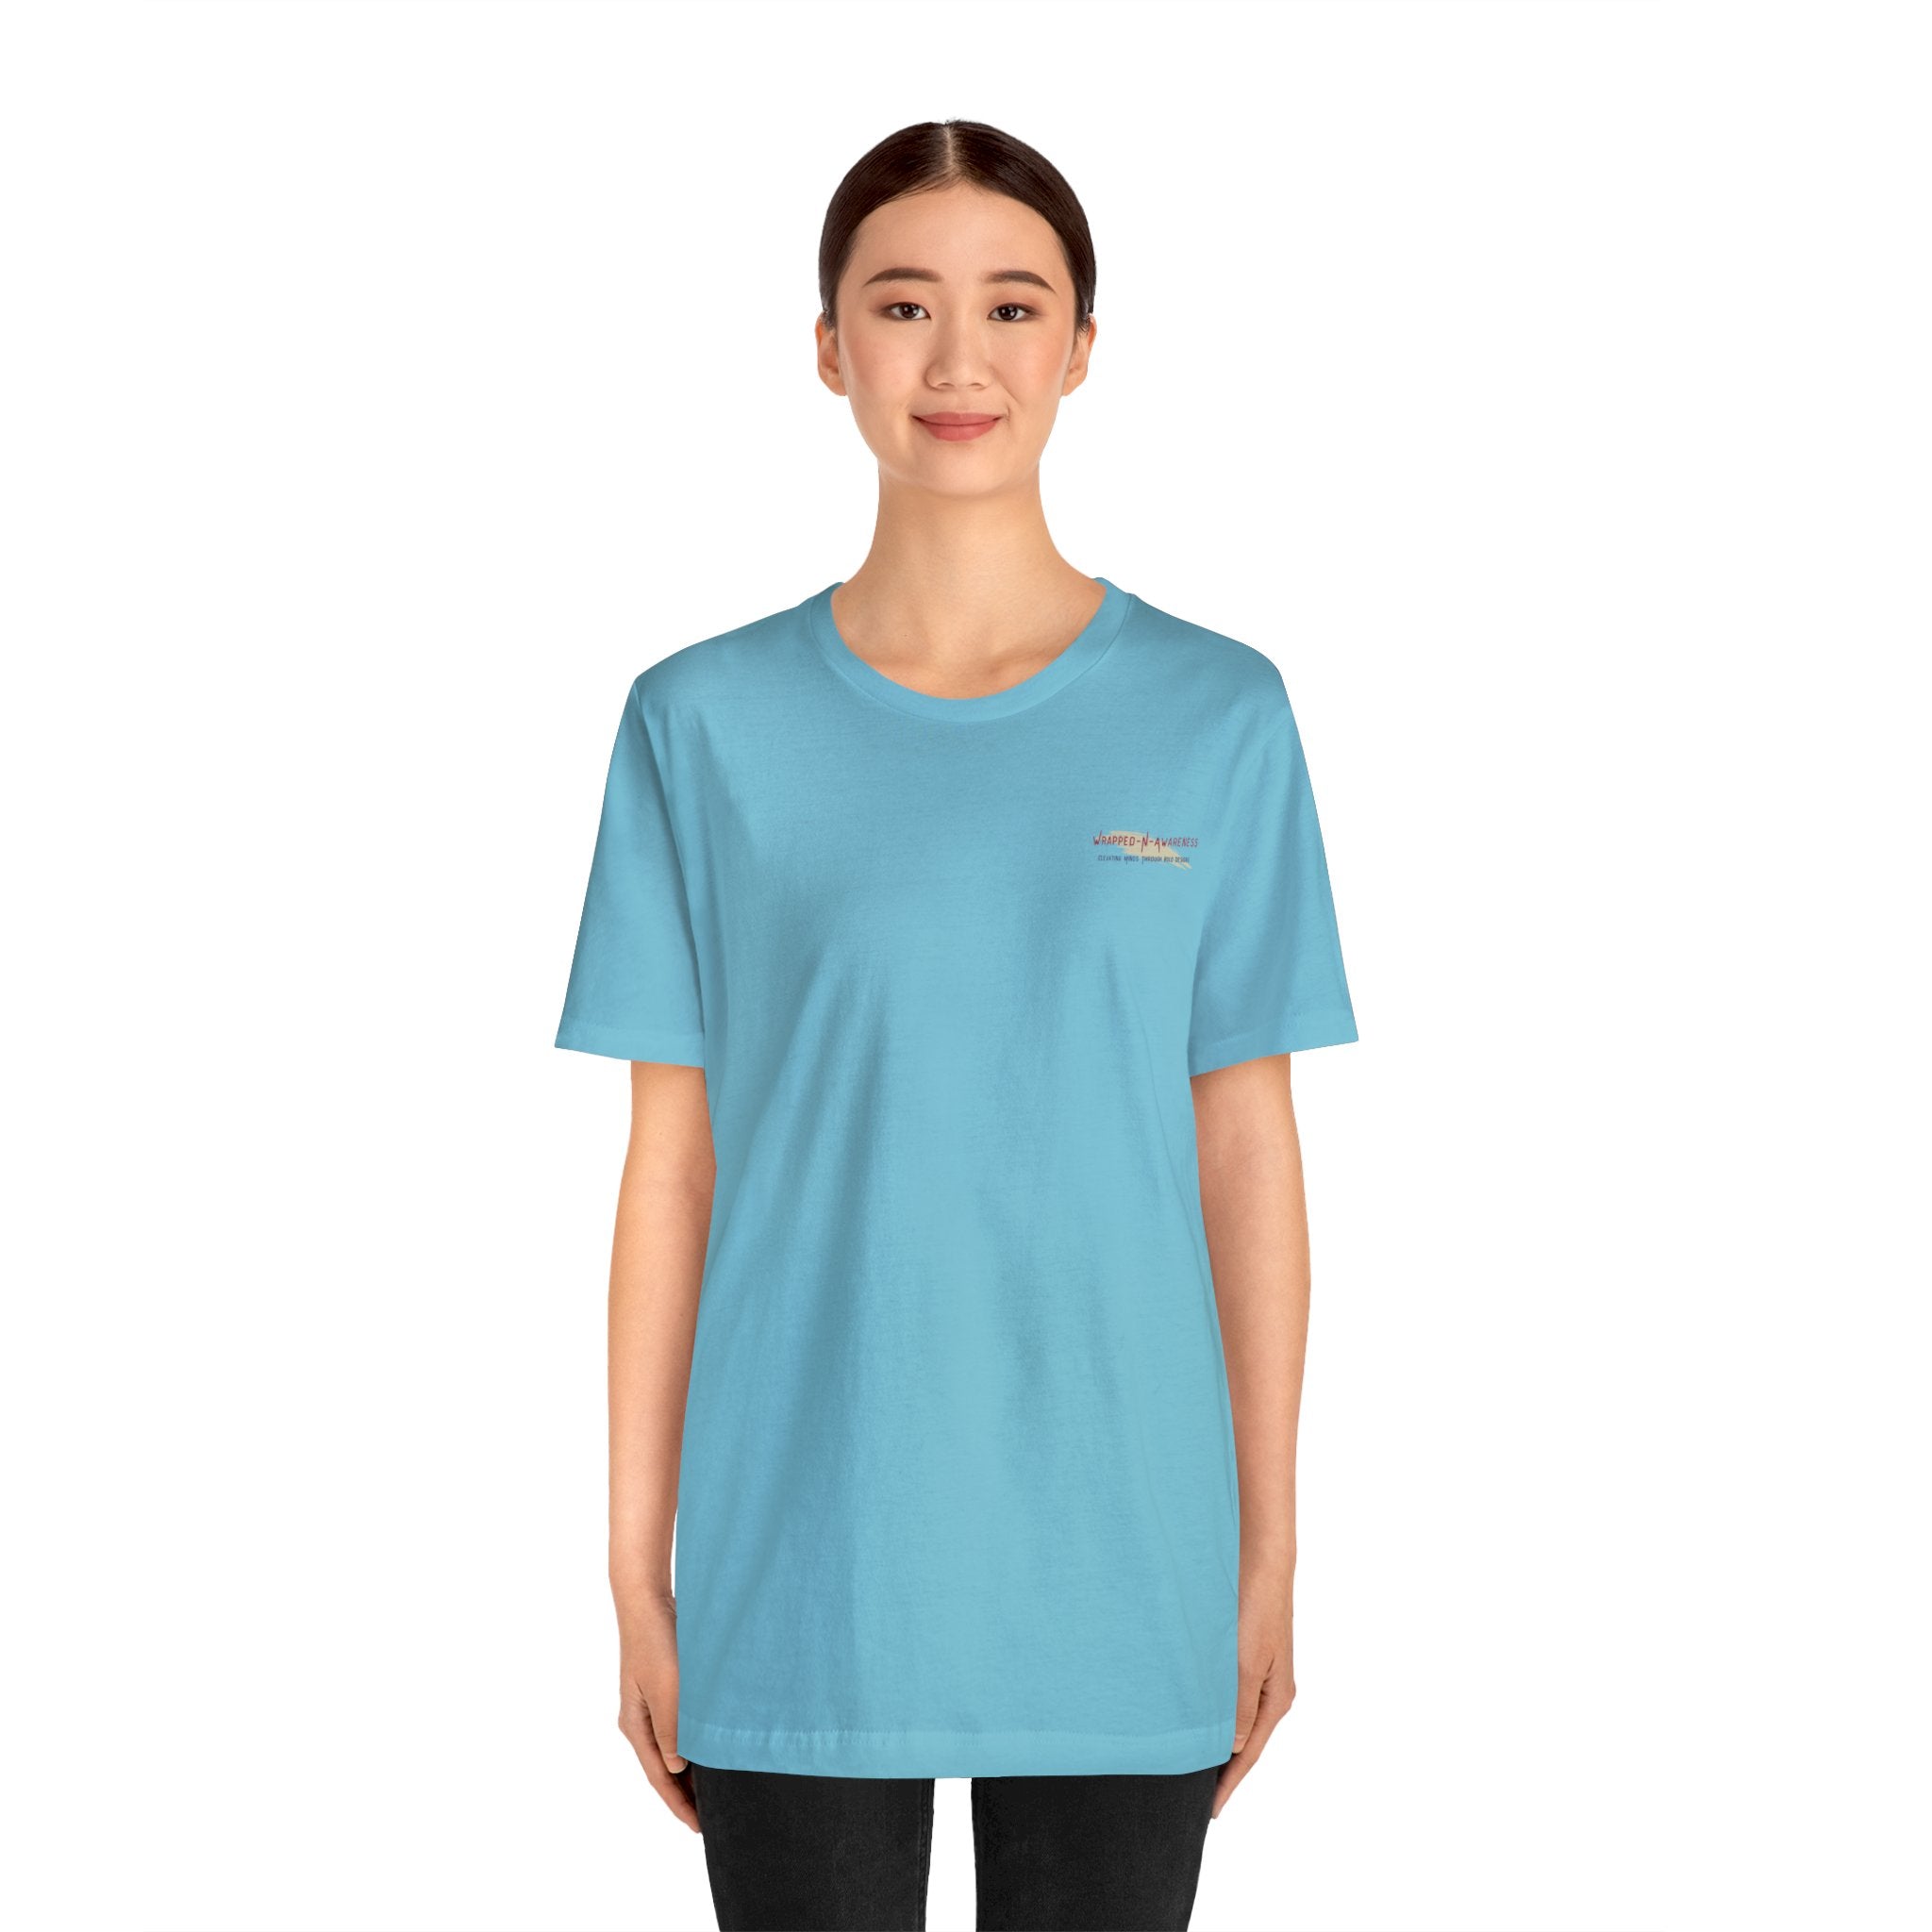 Brave Blossoms Jersey Tee - Bella+Canvas 3001 Turquoise Classic Tee Comfortable Tee Cotton T-Shirt Graphic Tee JerseyTee Statement Shirt T-shirt Tee Unisex Apparel T-Shirt 3465376323895793676_2048 Printify